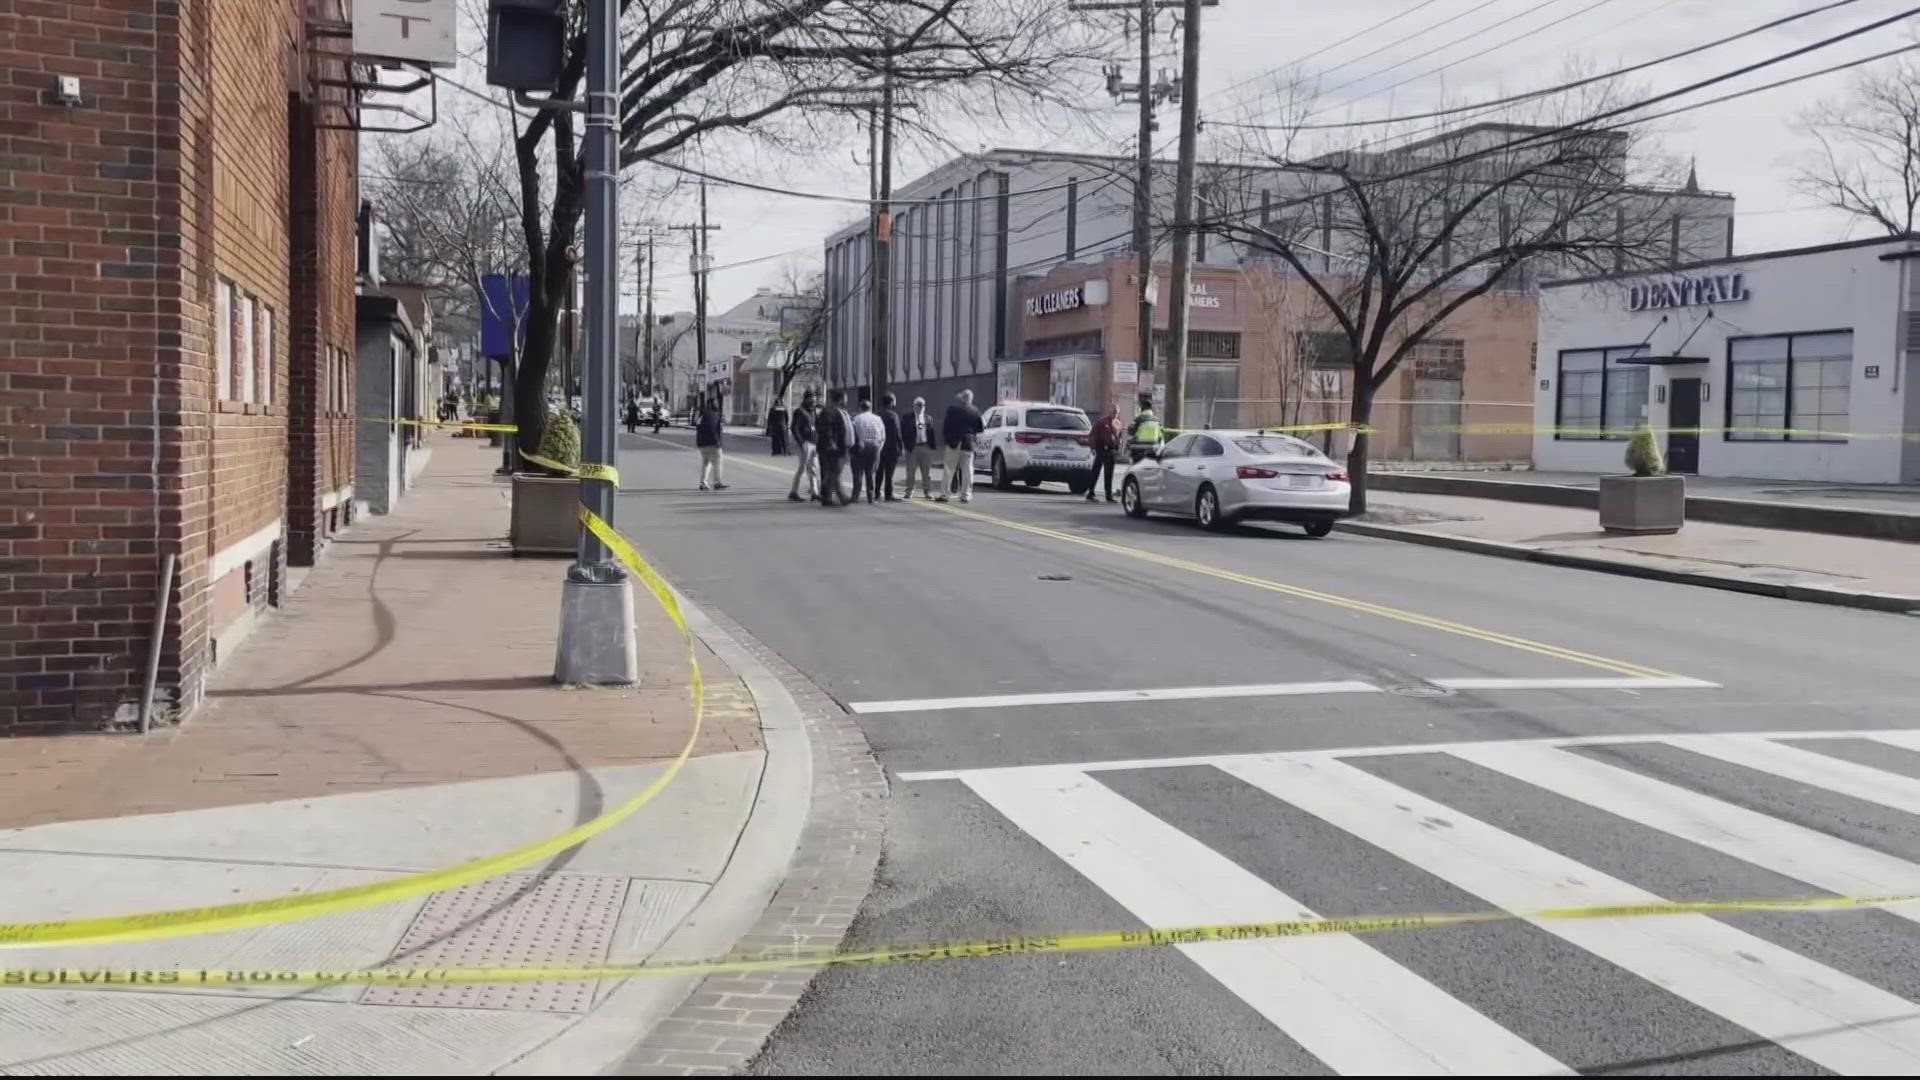 According to DC police, officers shot a man they weren't initially looking for in connection to an attacked on women in Southeast D.C.